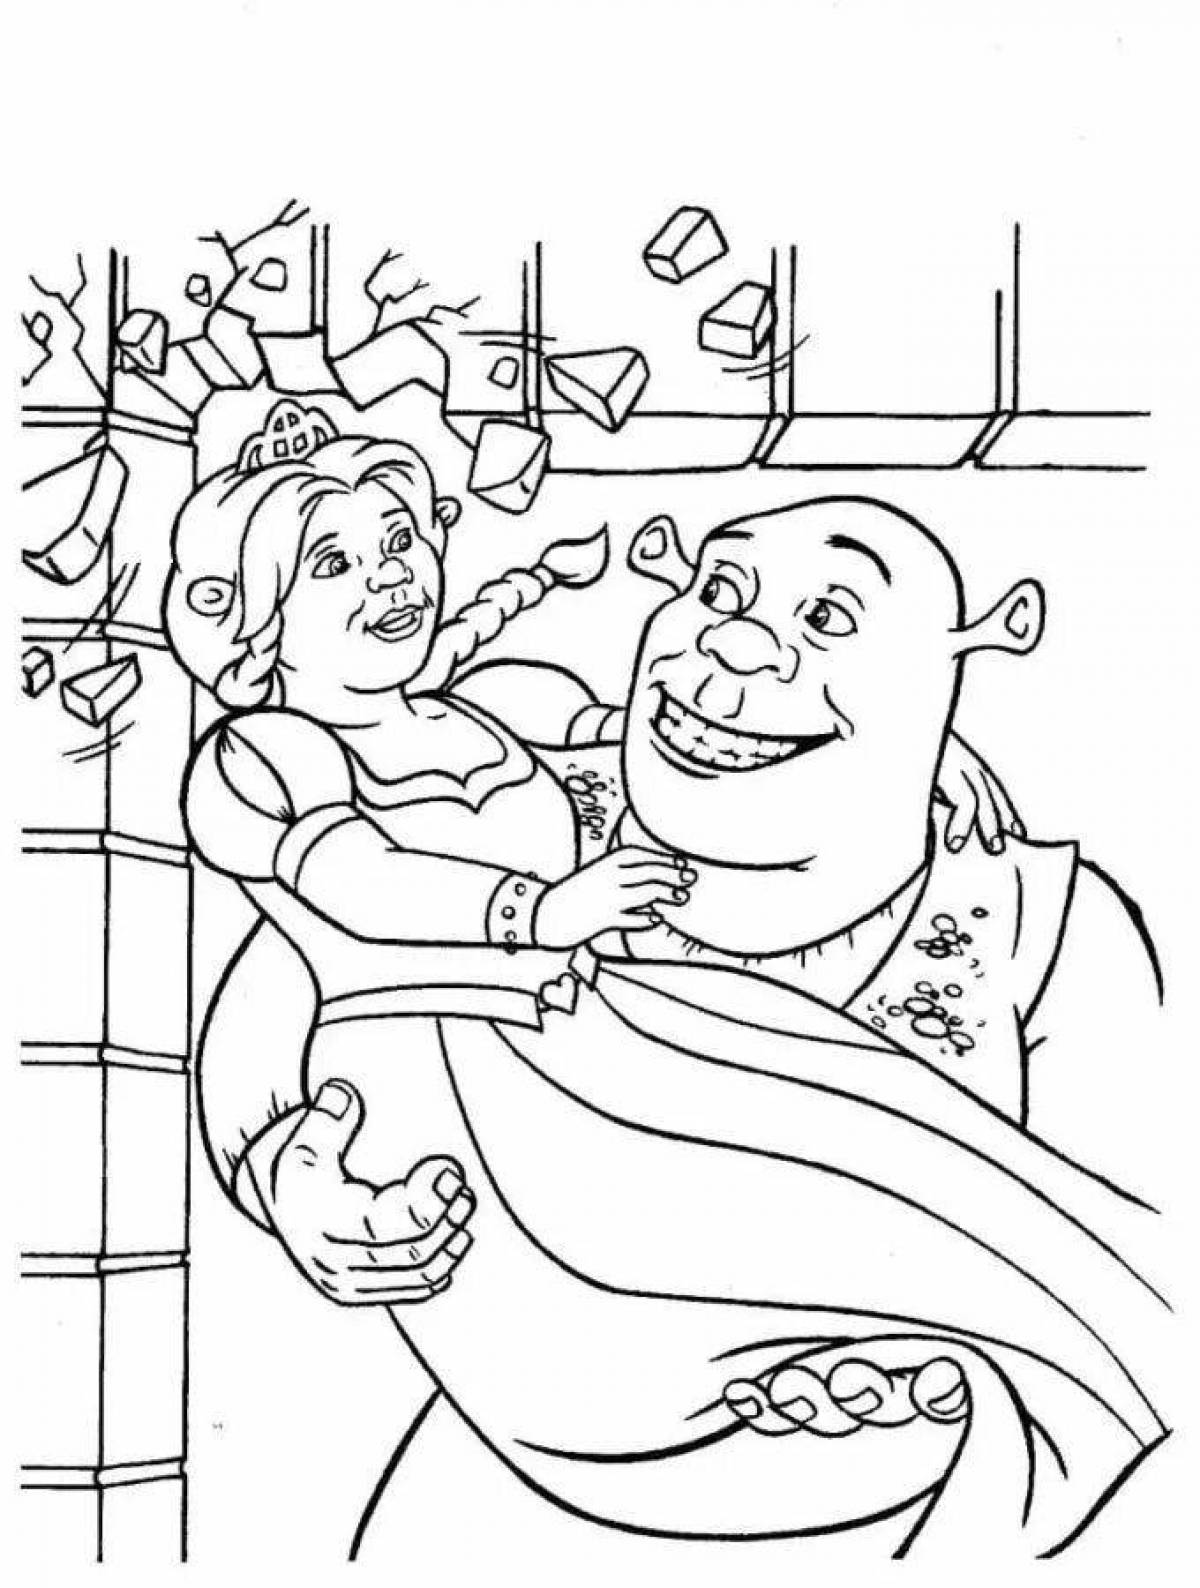 Delightful coloring shrek and fiona